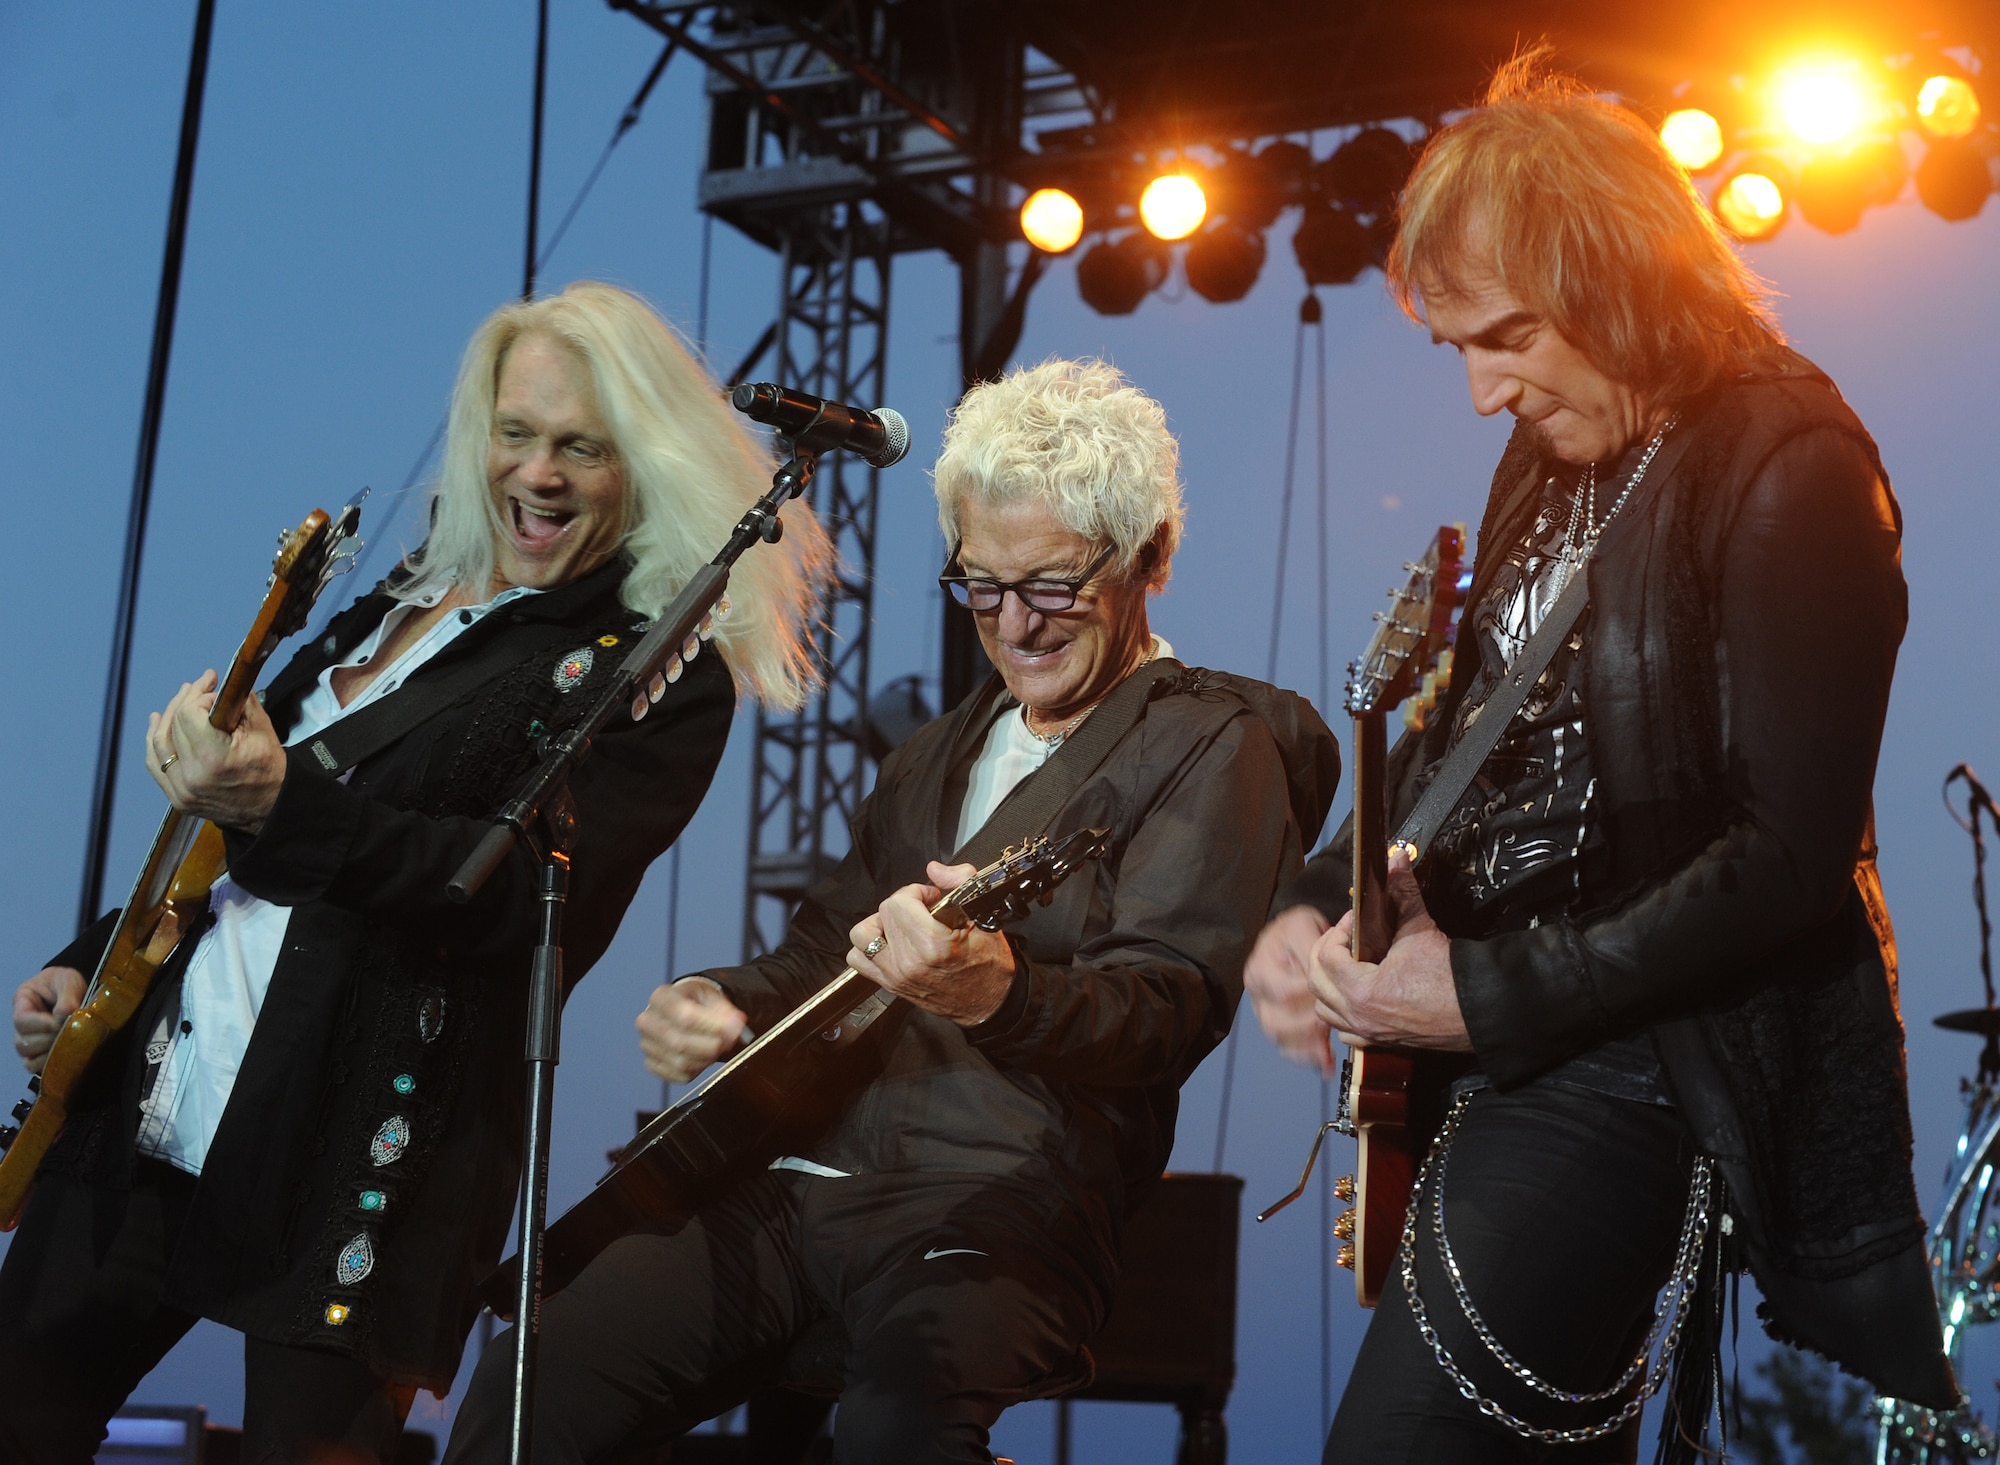 REO Speedwagon performs to an audience primarily made up of America’s veterans during a Grandstand performance at the Spokane Interstate Fair in Spokane, Washington, Sept. 11, 2014. During their performance, Cronin took a moment to thank all past and present American veterans and their families for their service and sacrifice in the name of freedom. (U.S. Air Force photo by Staff Sgt. Samantha Krolikowski/Released)